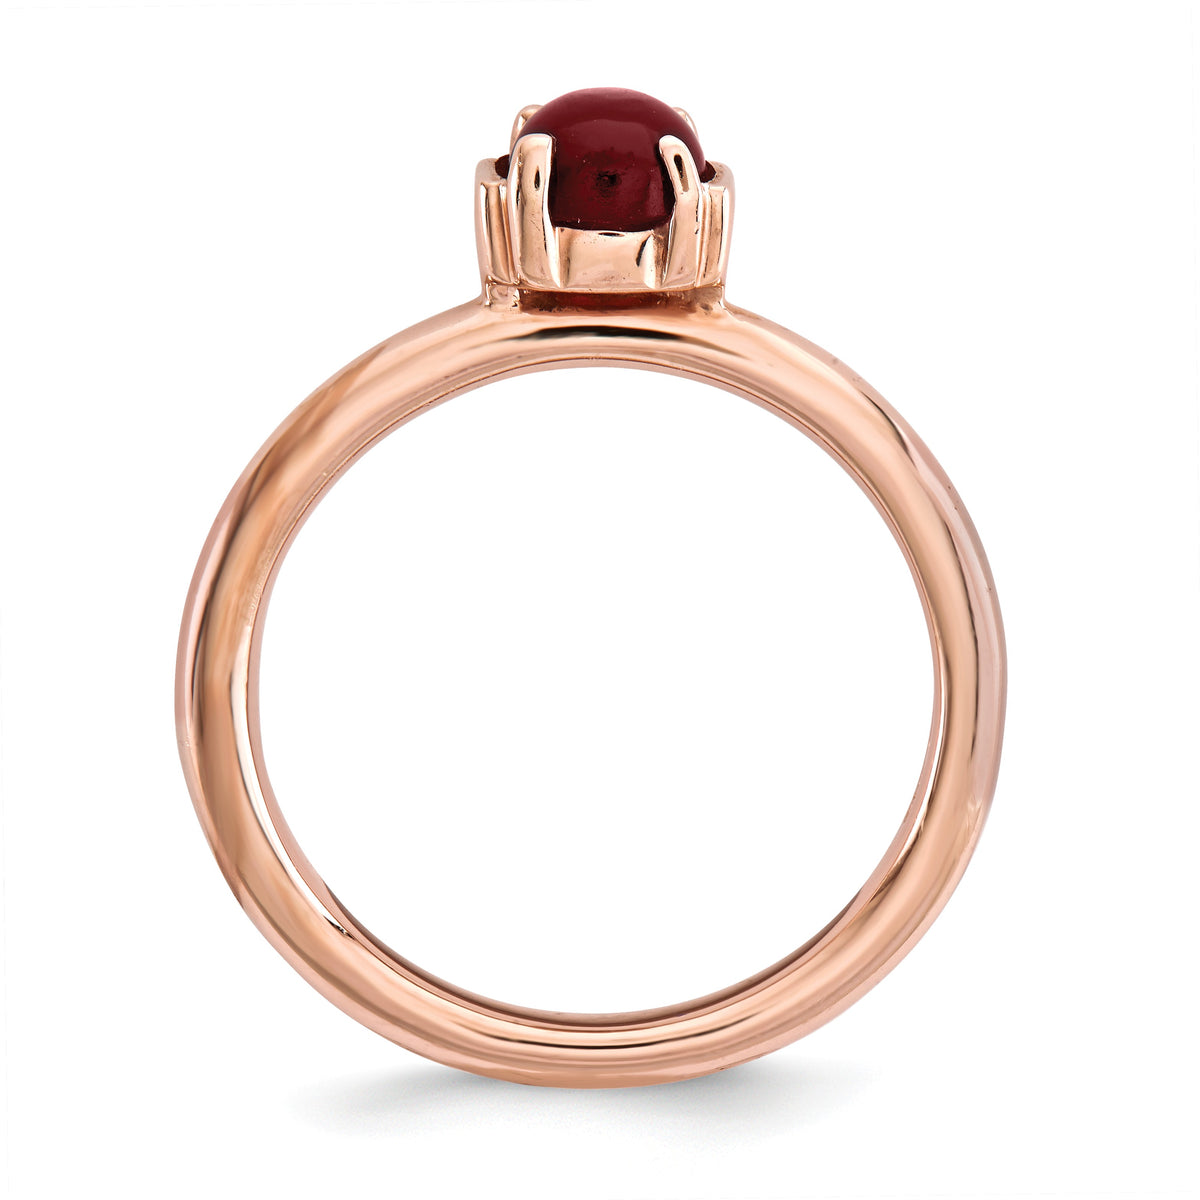 Alternate view of the 14k Rose Gold Plated Sterling Silver &amp; Garnet 5mm Cabochon Stack Ring by The Black Bow Jewelry Co.